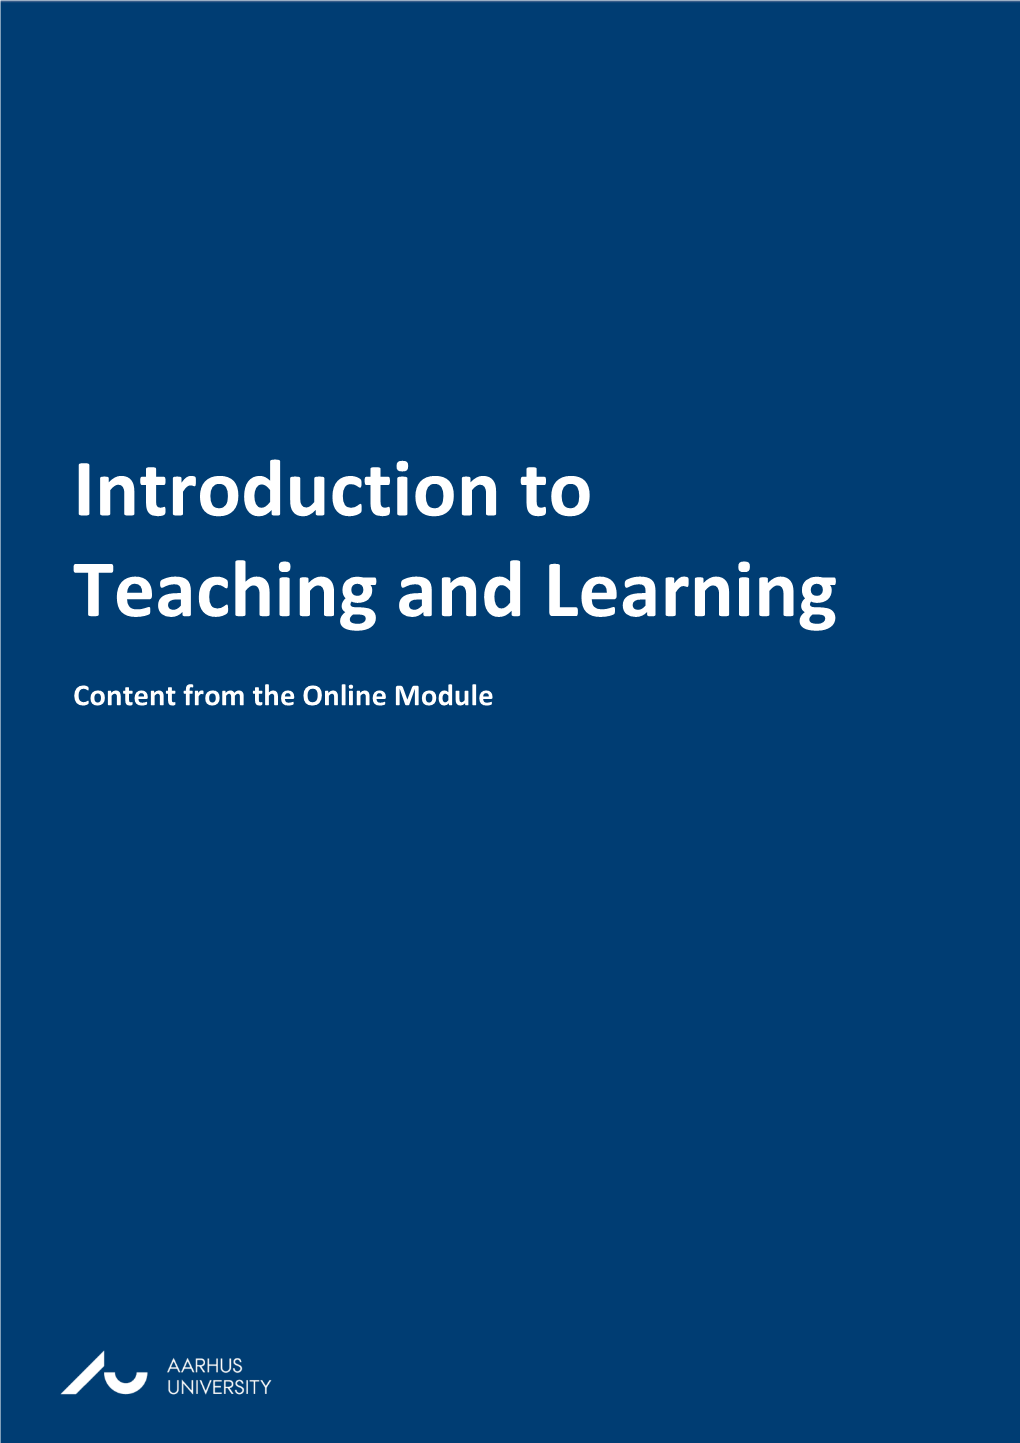 Introduction to Teaching and Learning